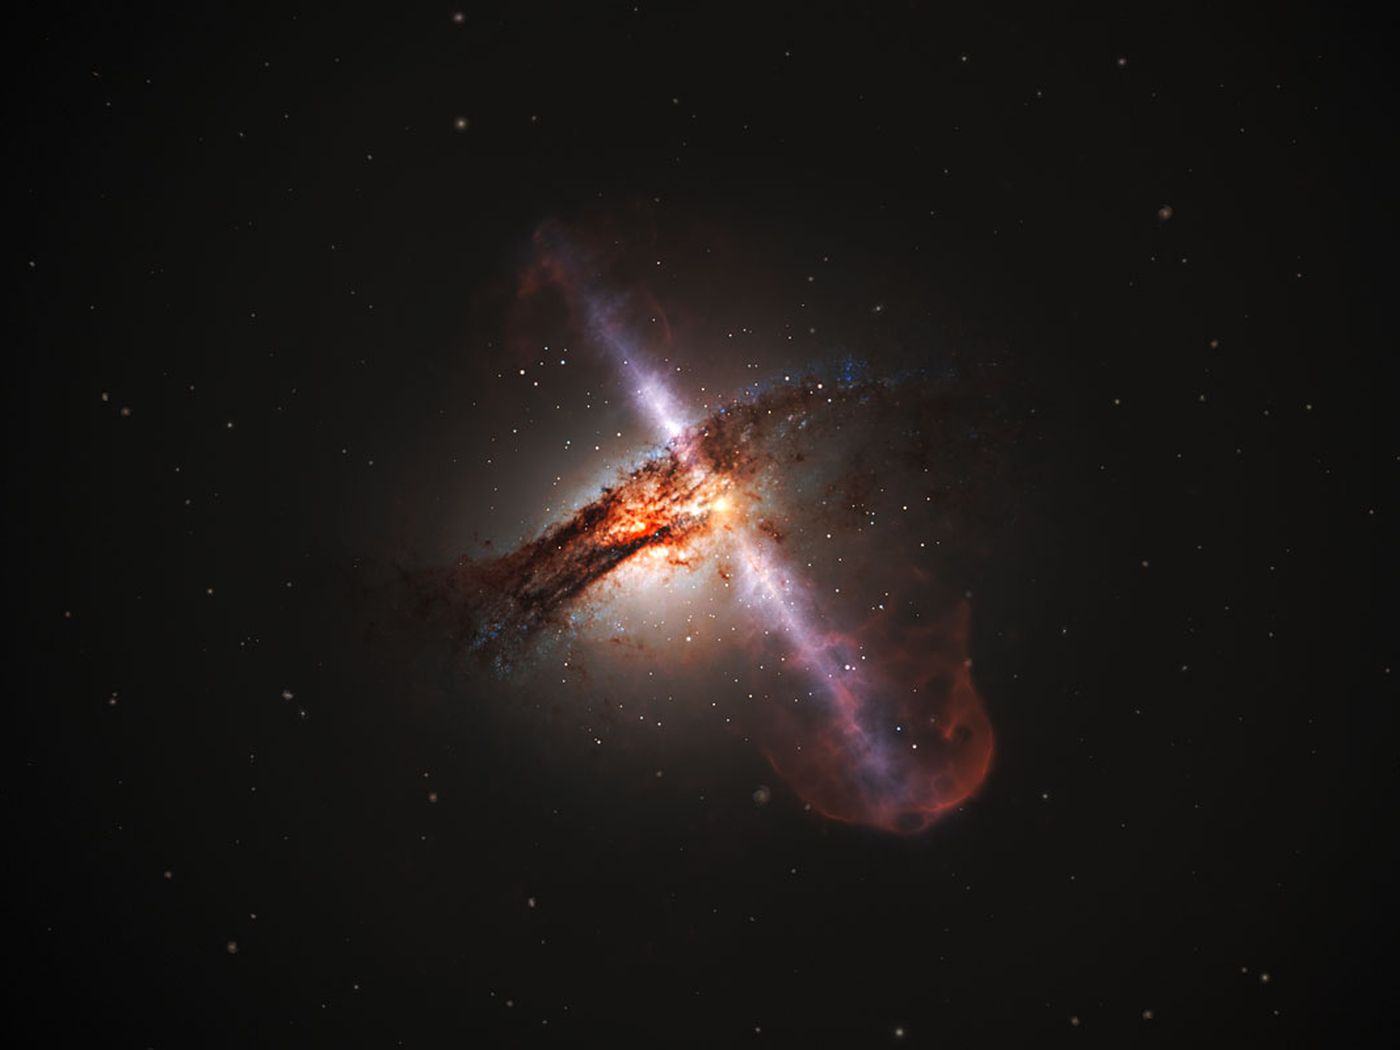 Most image of black holes are illustrations. Here's what our telescopes actually capture